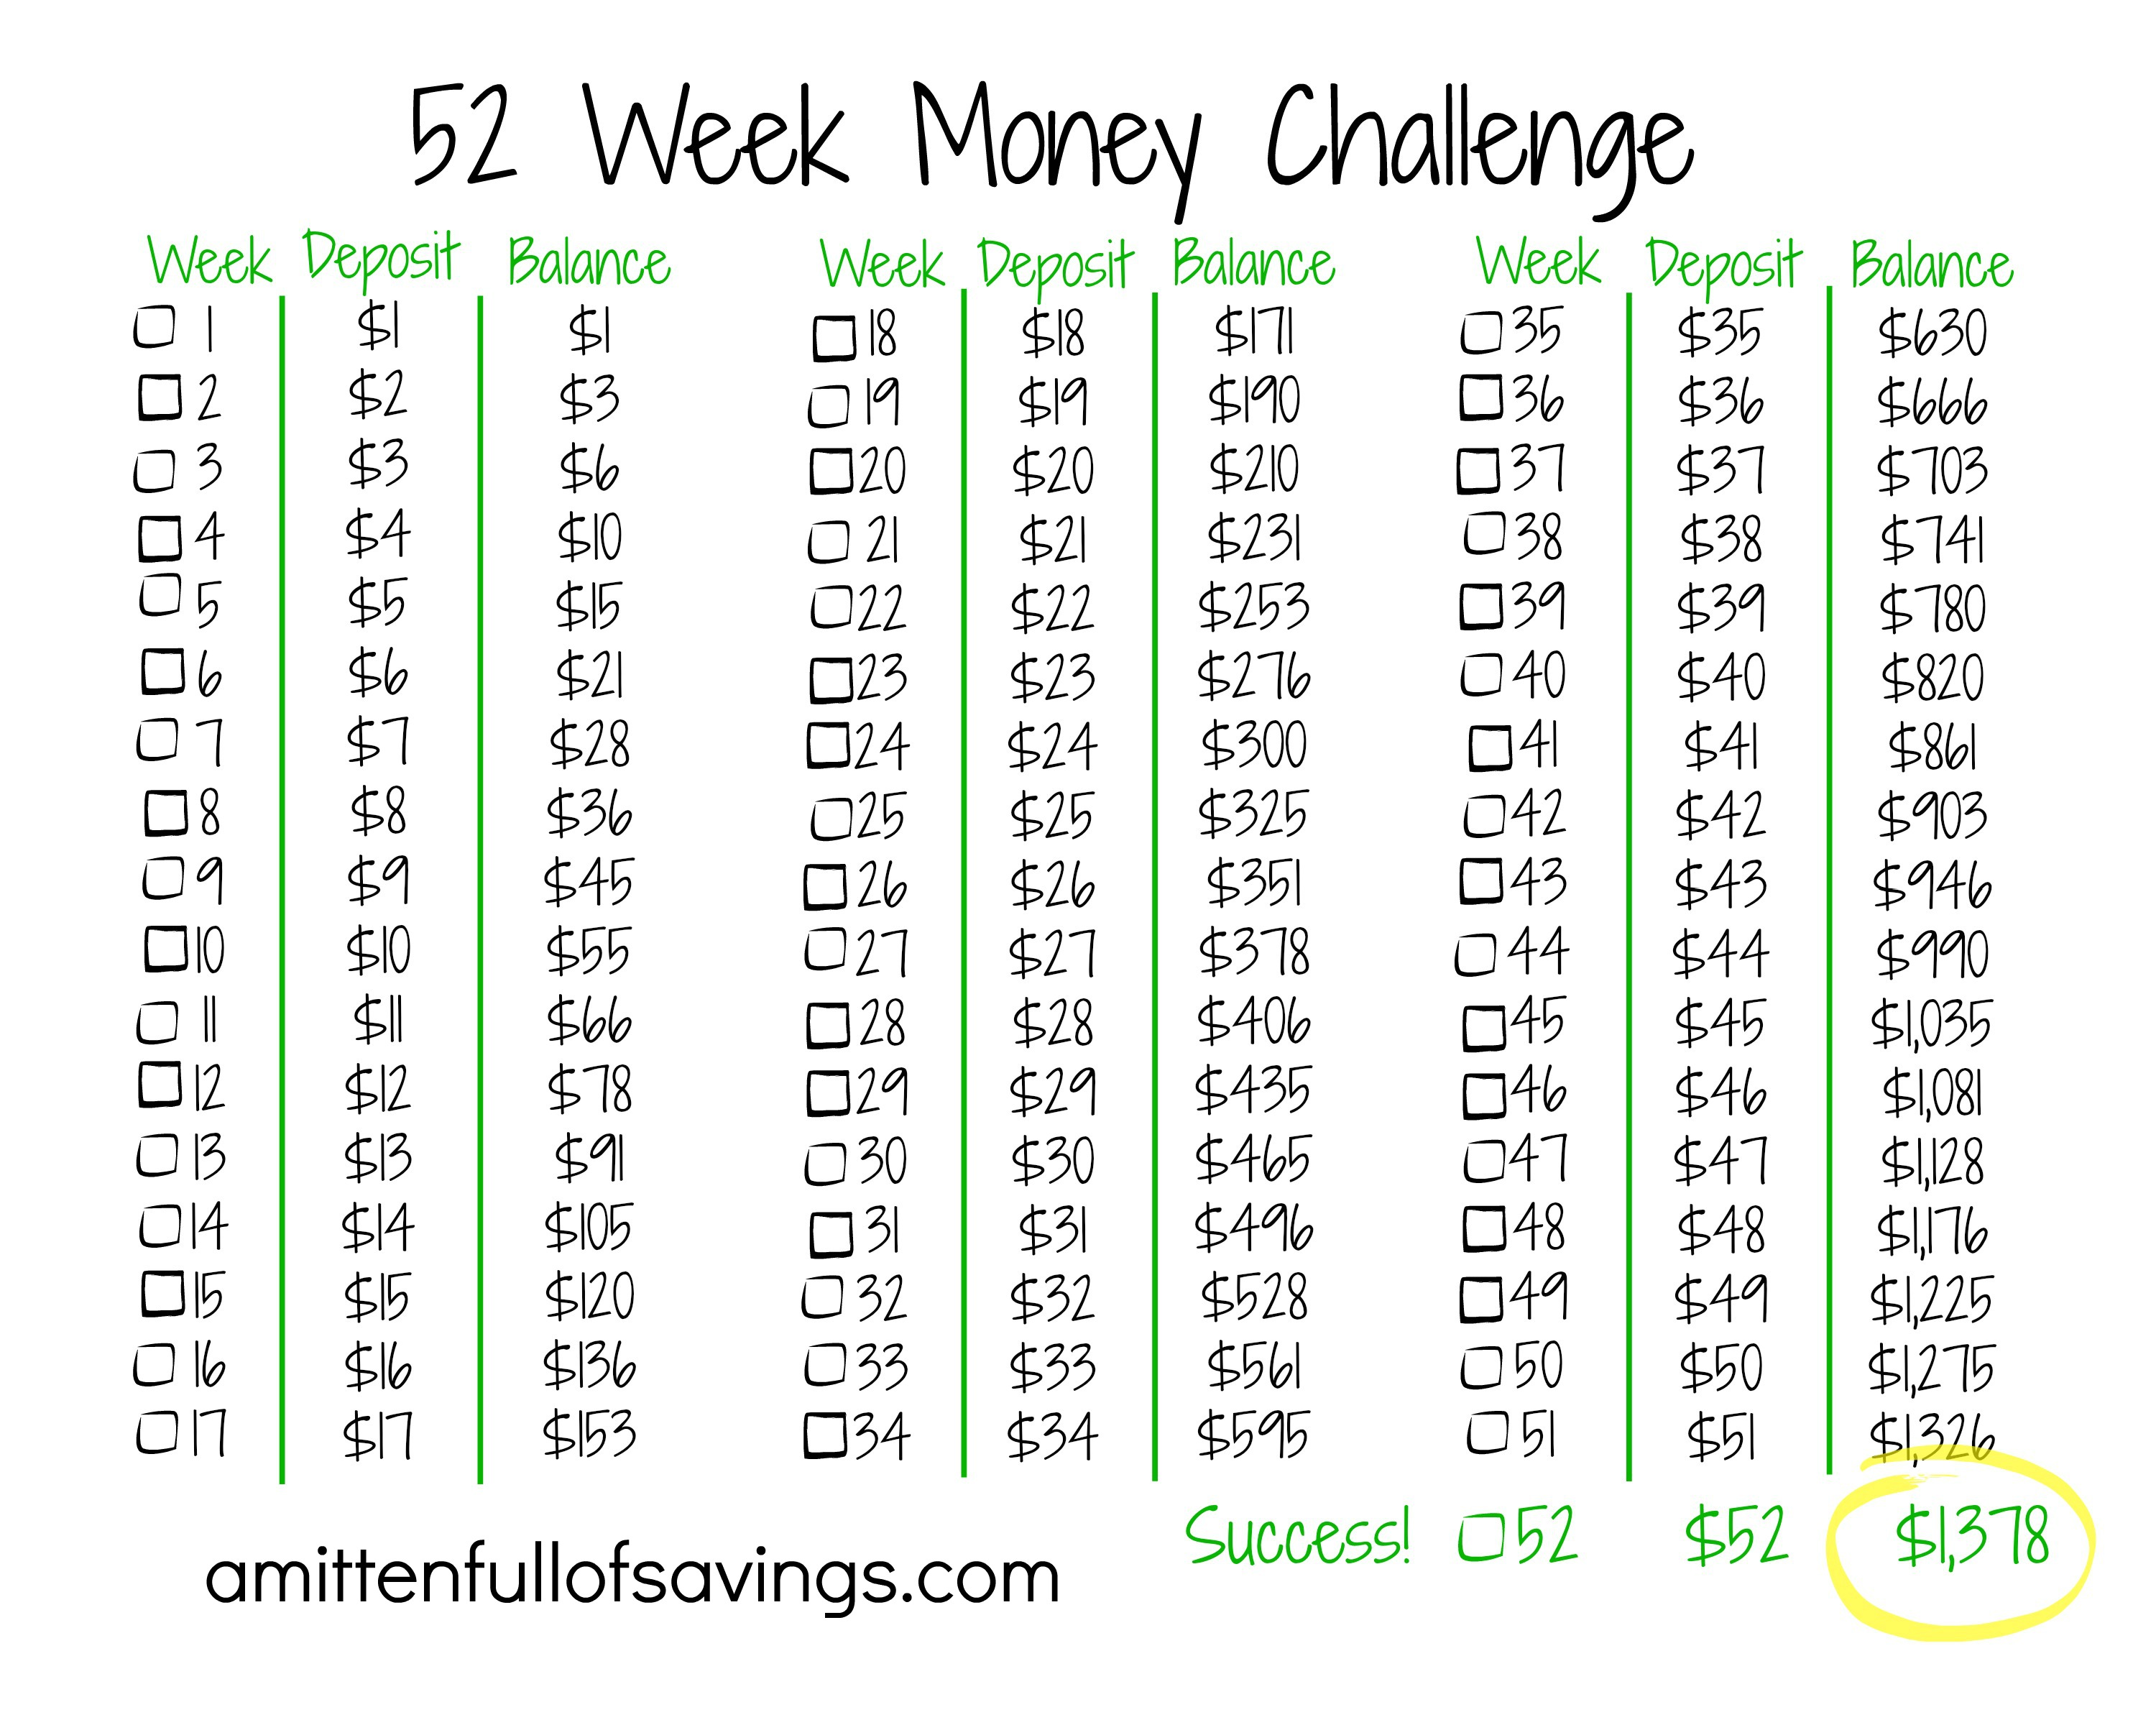 Join the 52 Week Challenge. Download a copy of the Savings Calculator and get started today!